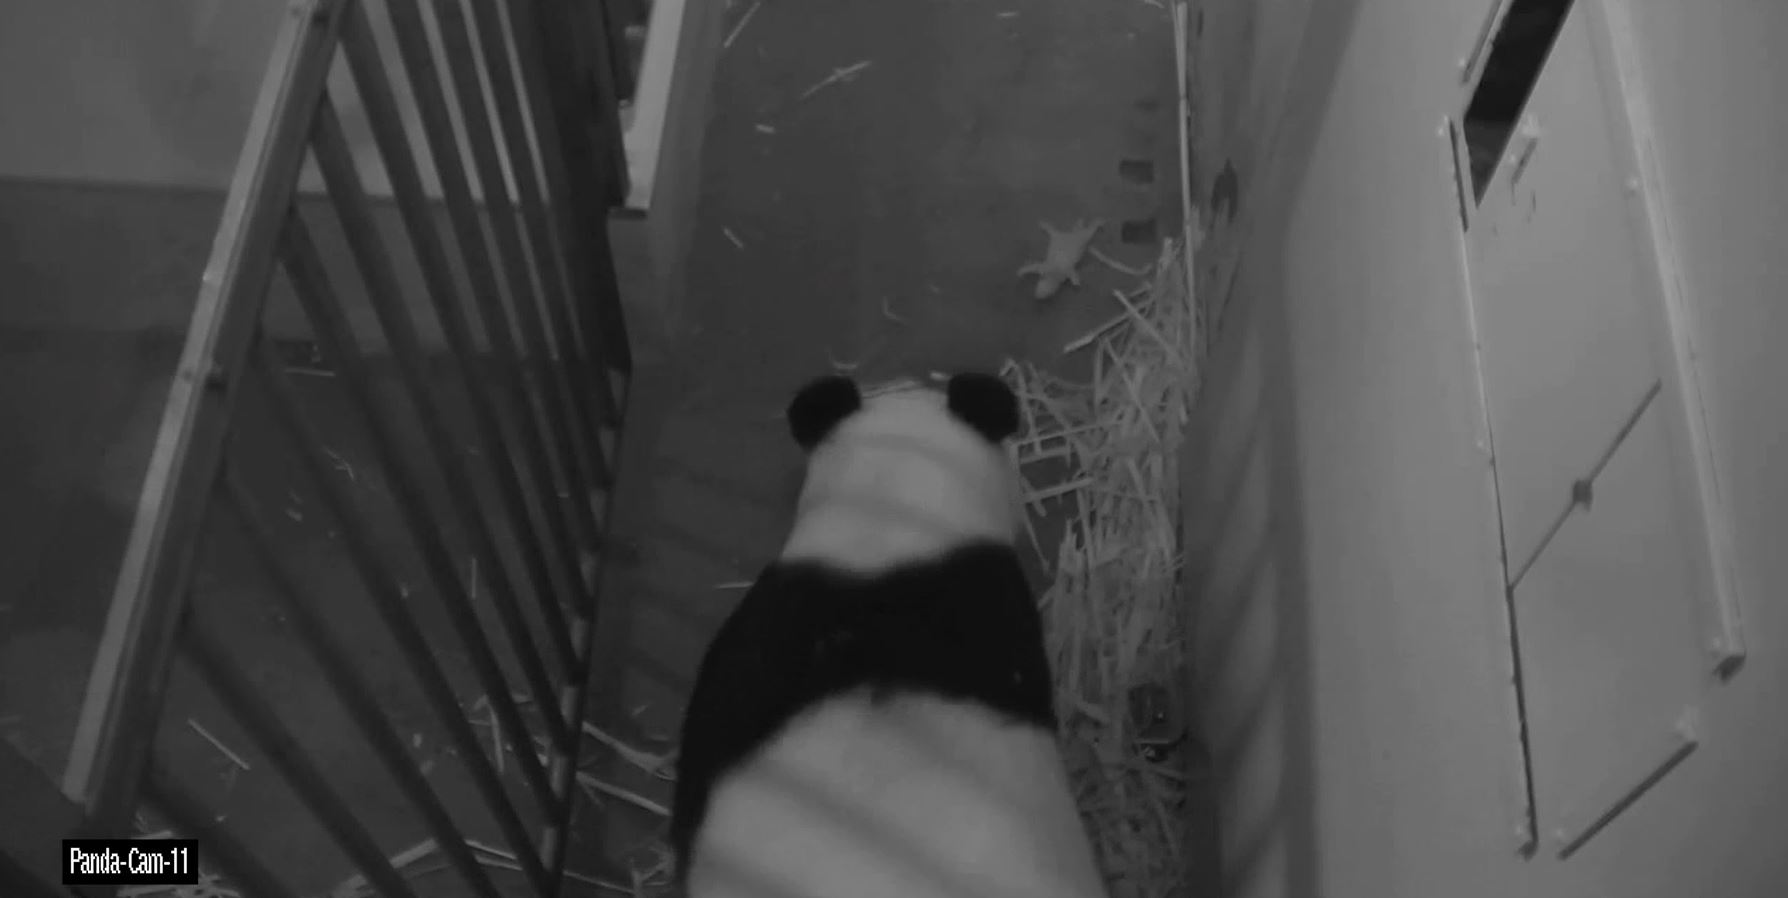 Surviving, thriving giant panda cub at National Zoo is male